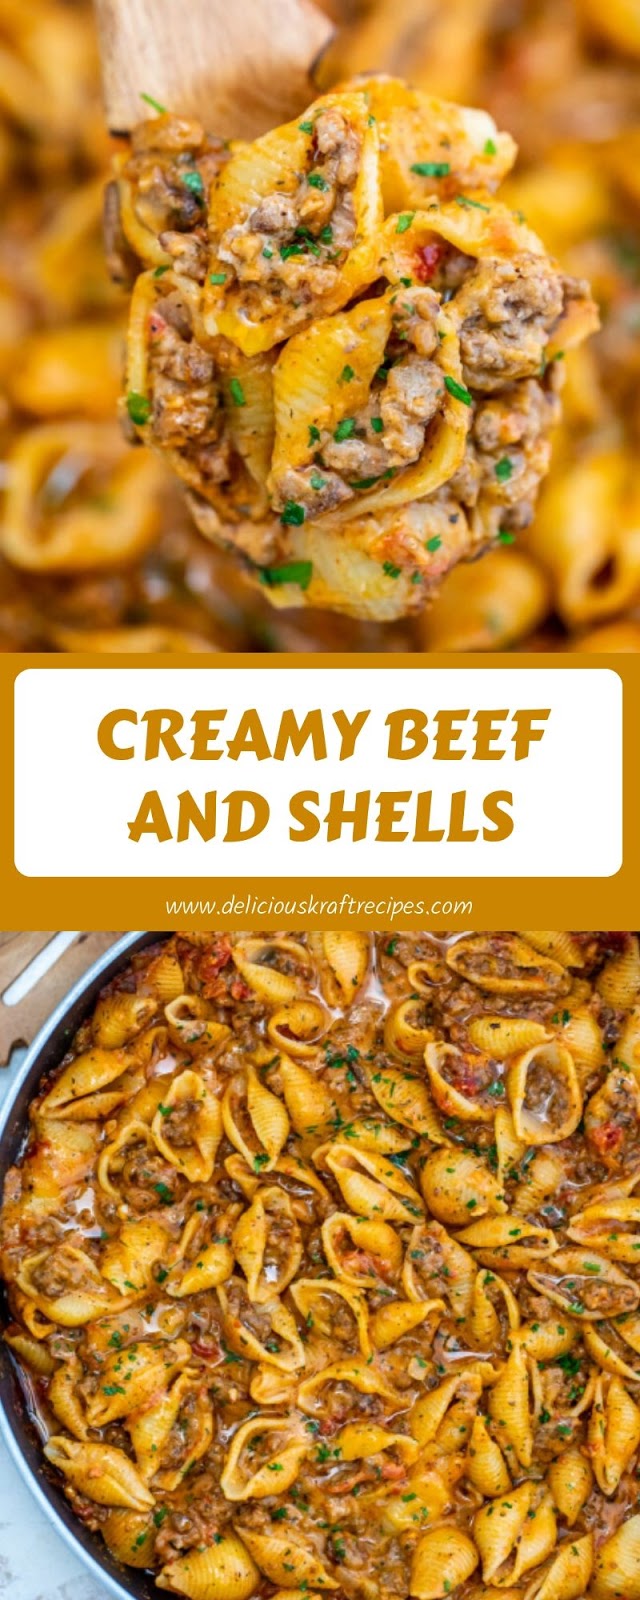 CREAMY BEEF AND SHELLS